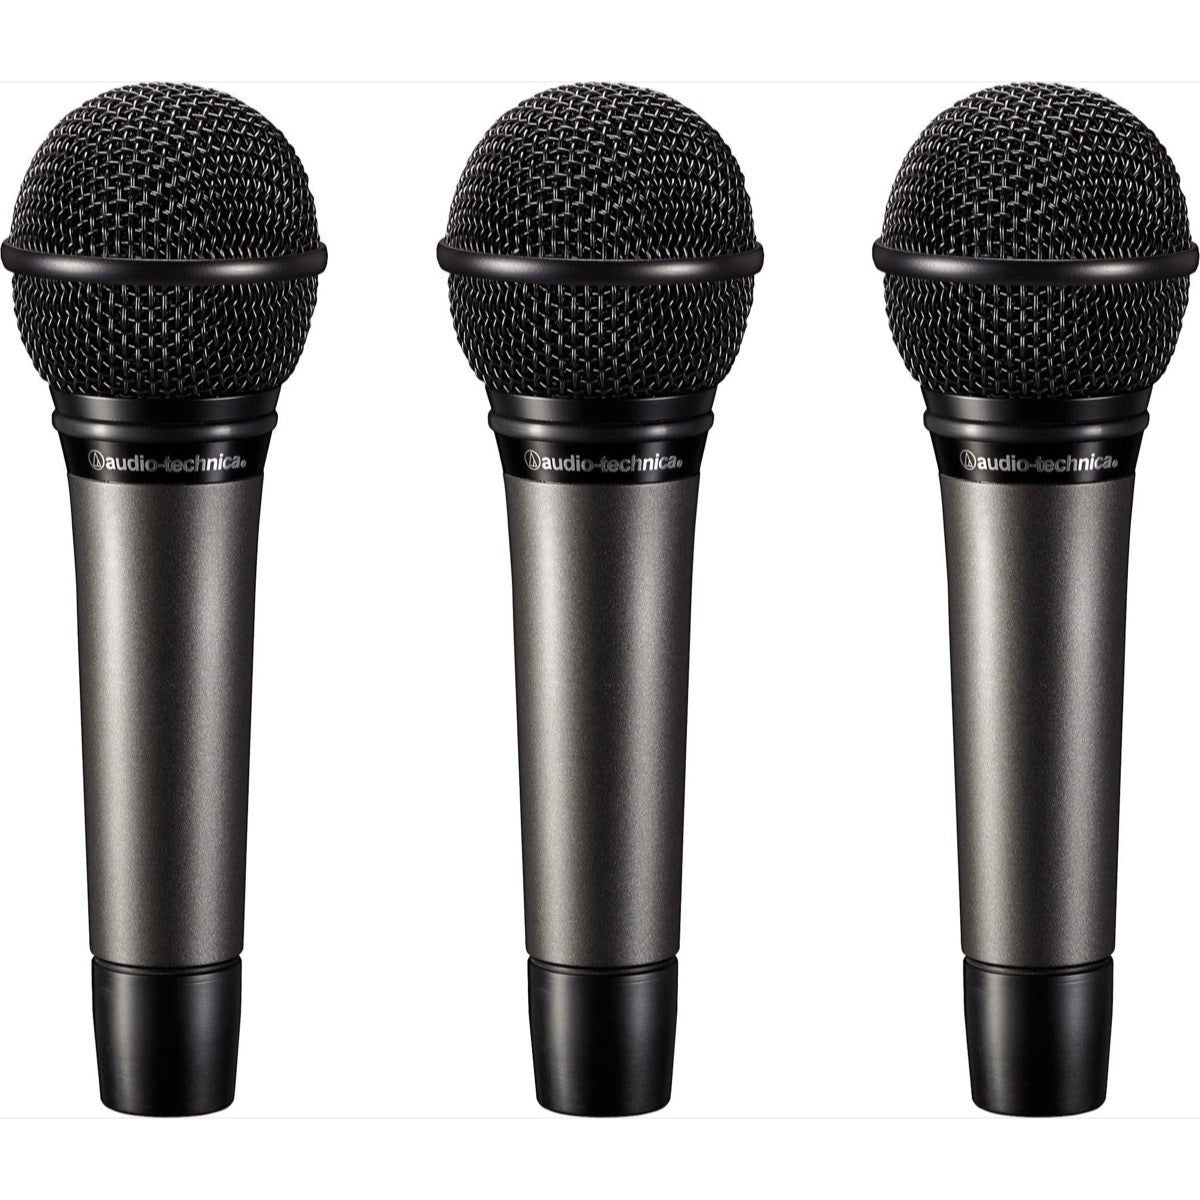 Audio-Technica ATM510 Dynamic Cardioid Handheld Microphone, (3-Pack)